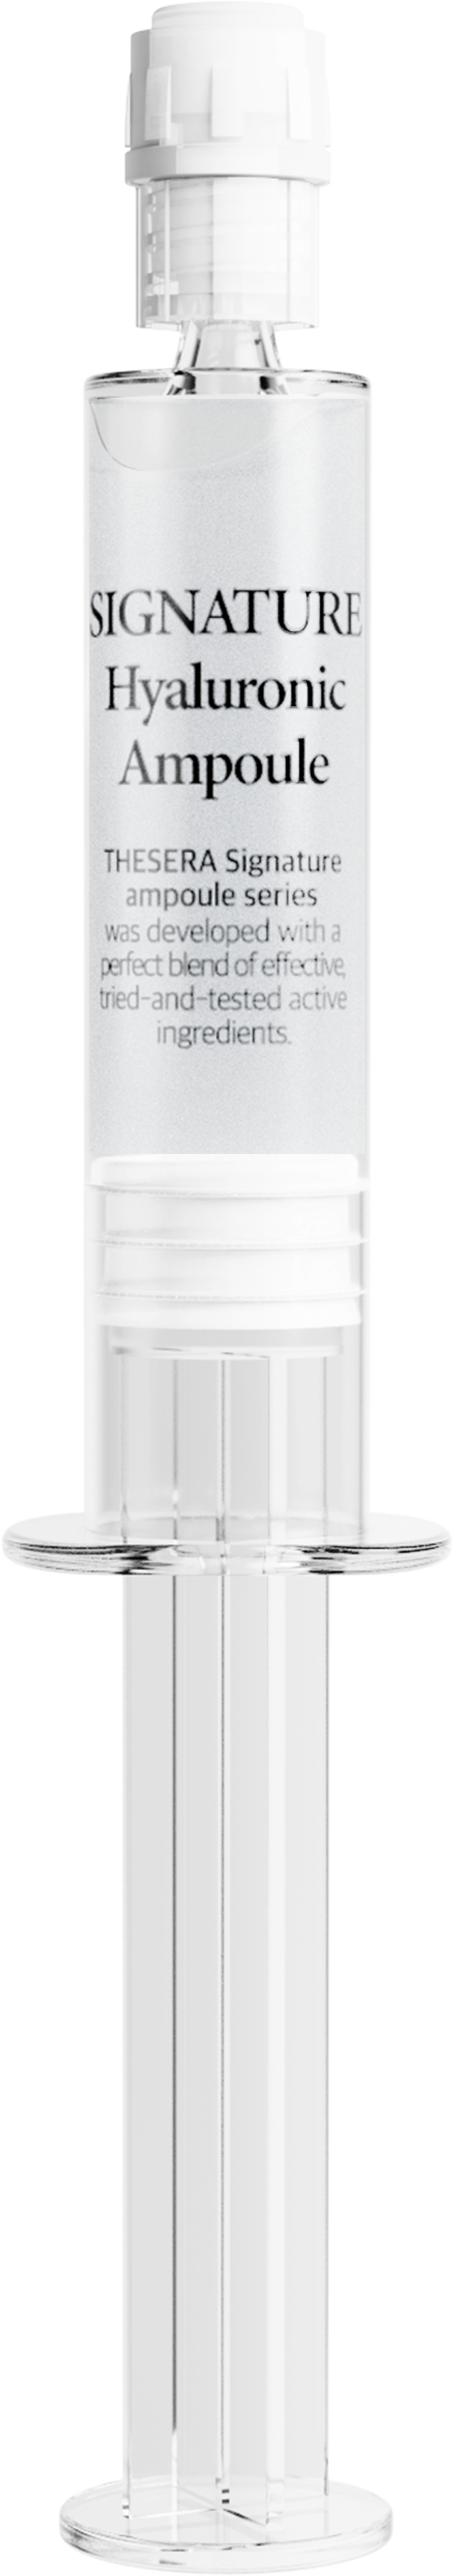 SIGNATURE Hyaluronic Ampoule